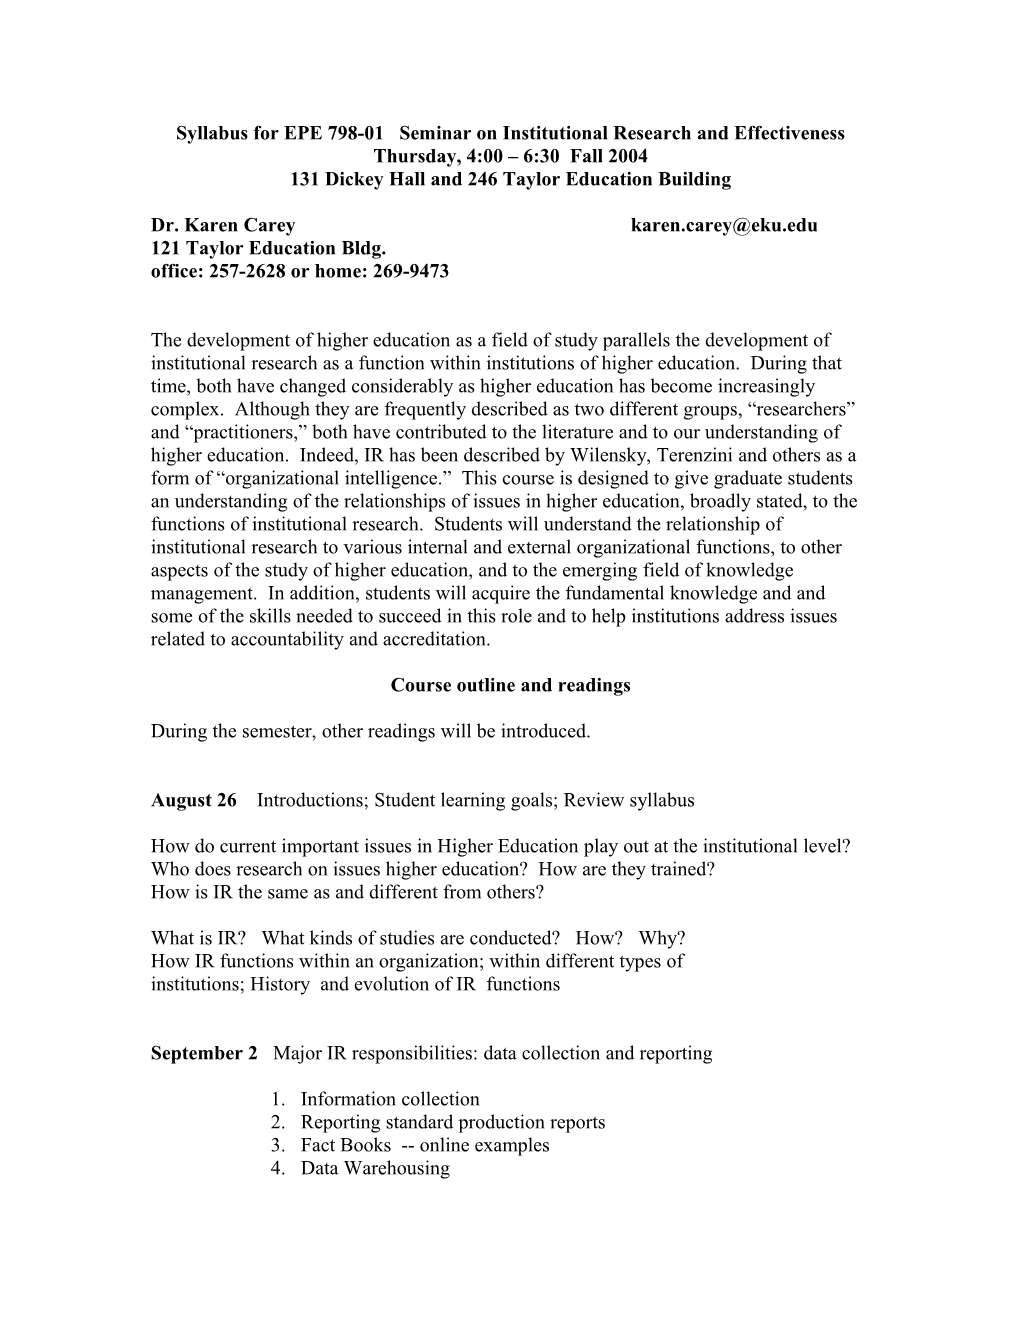 EPE 798-01 Seminar on Institutional Research and Effectiveness